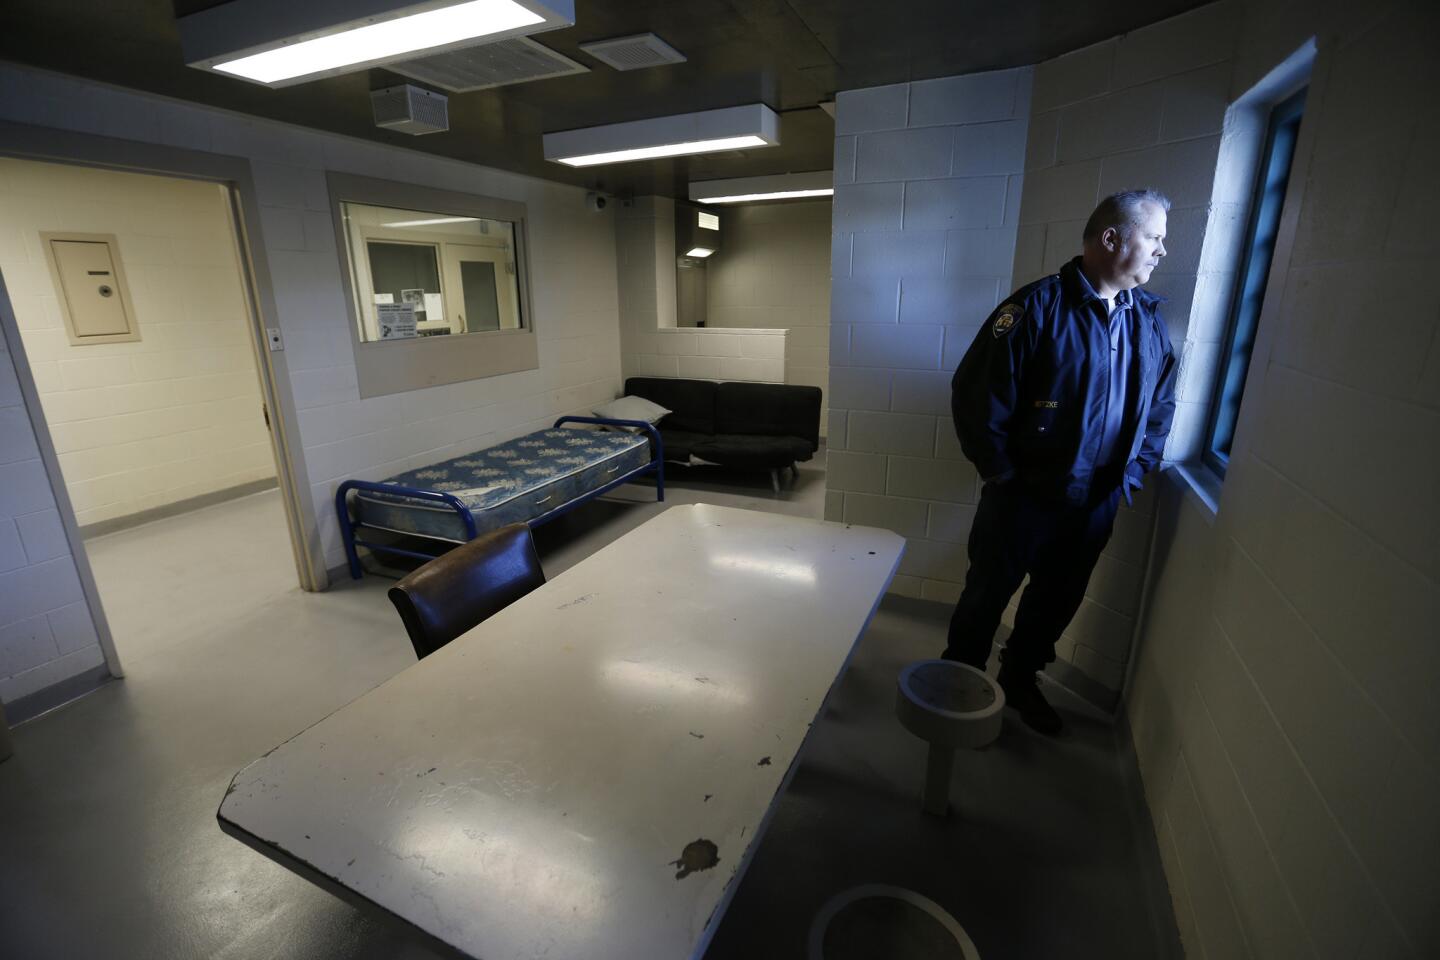 Pay-to-stay jails